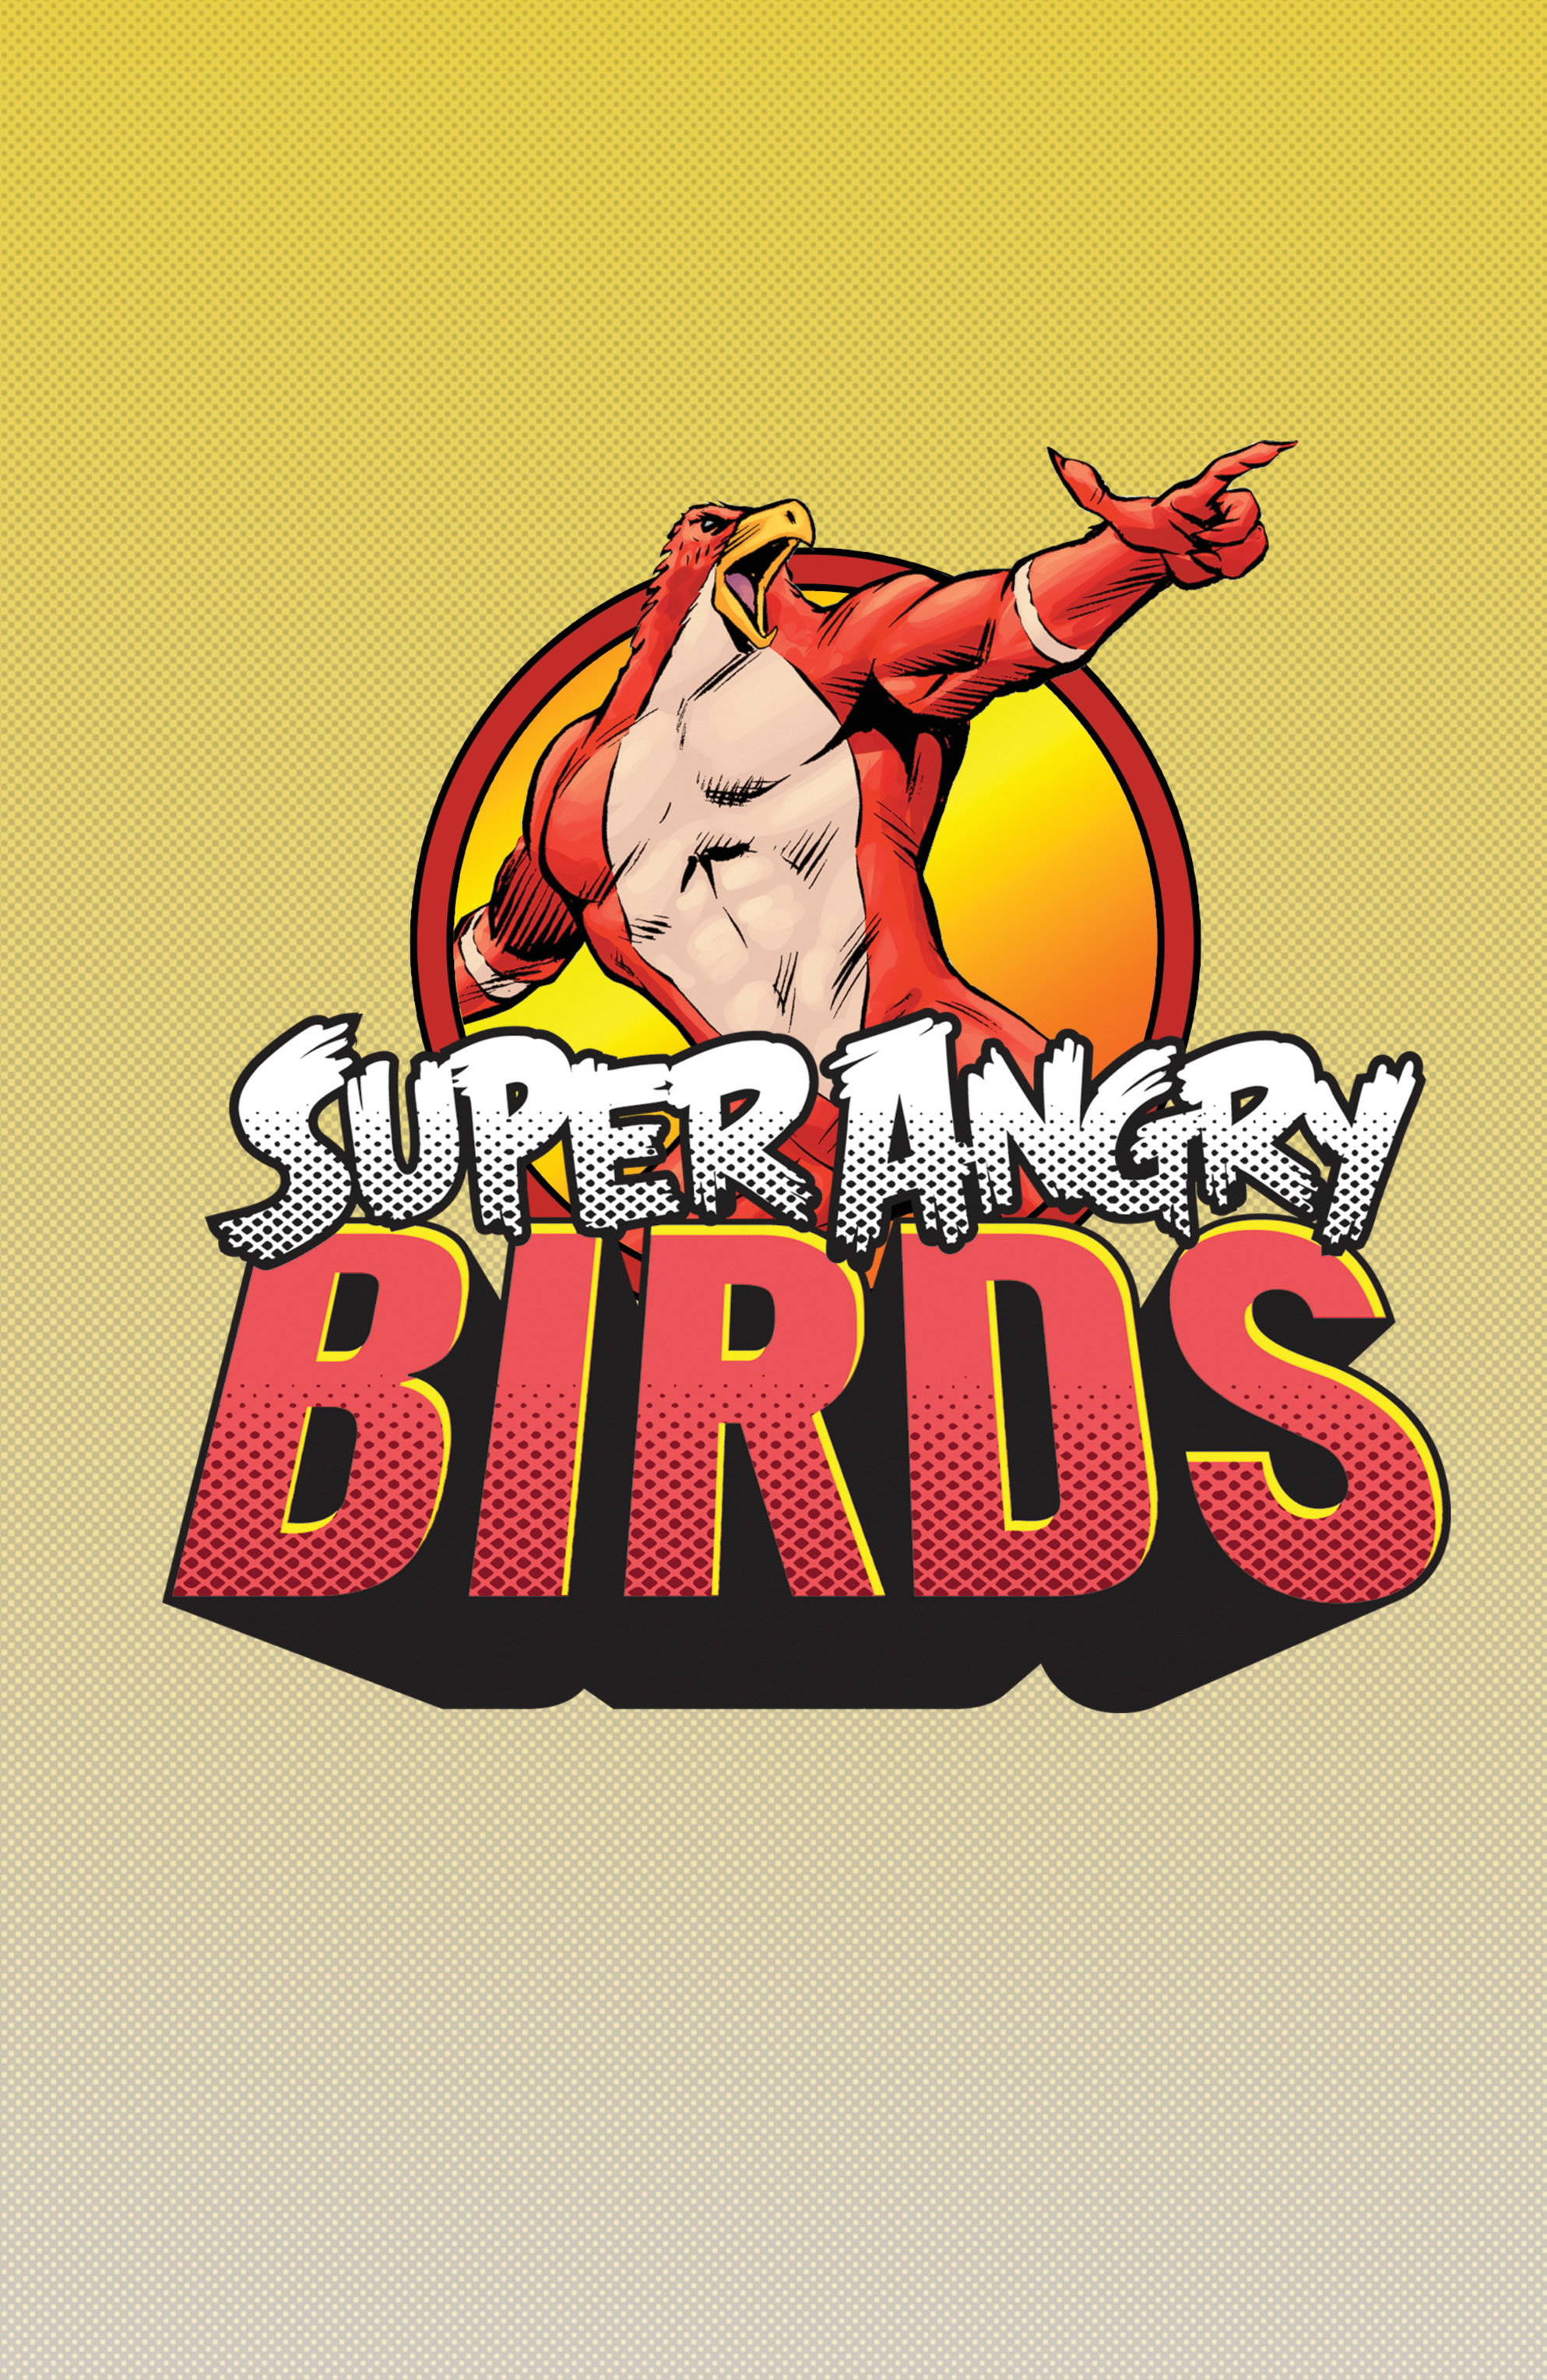 Read online Super Angry Birds comic -  Issue # TPB - 2